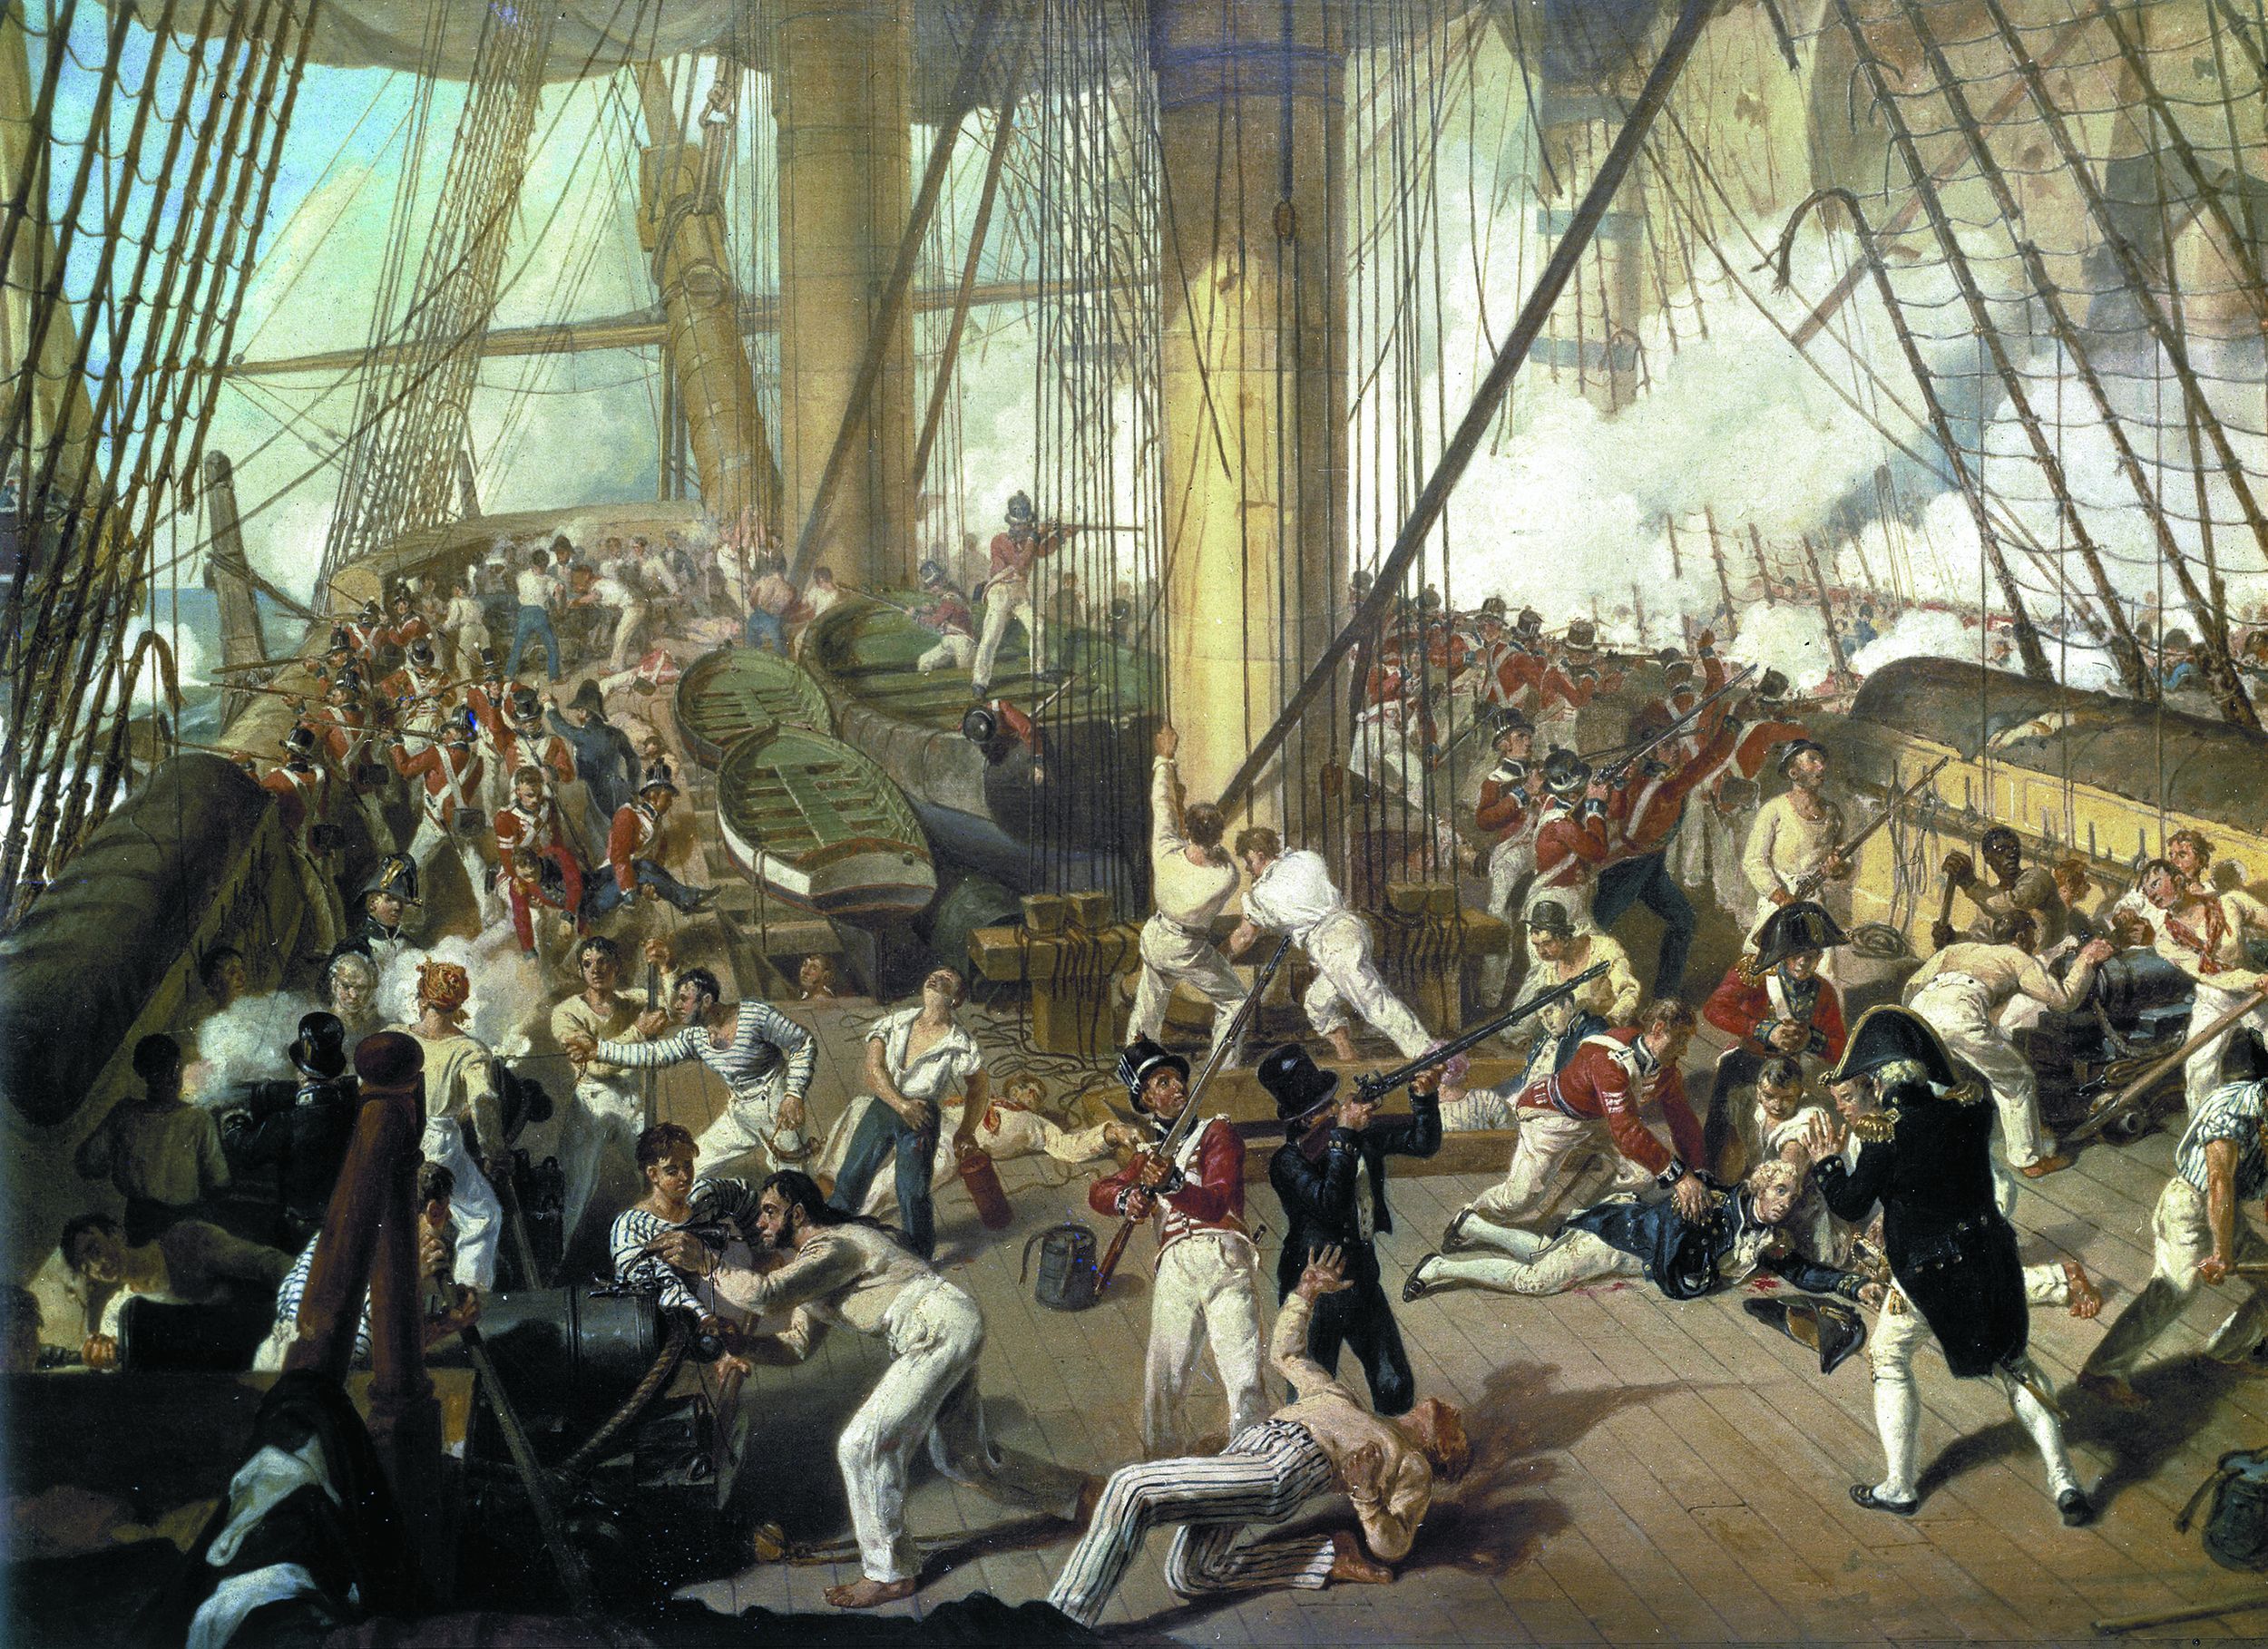 Nelson, lower right, lies mortally wounded on the top deck of his flag ship Victory at the height of the fighting. Modern scholarship suggests he was struck by a ricochet round from a French musket.